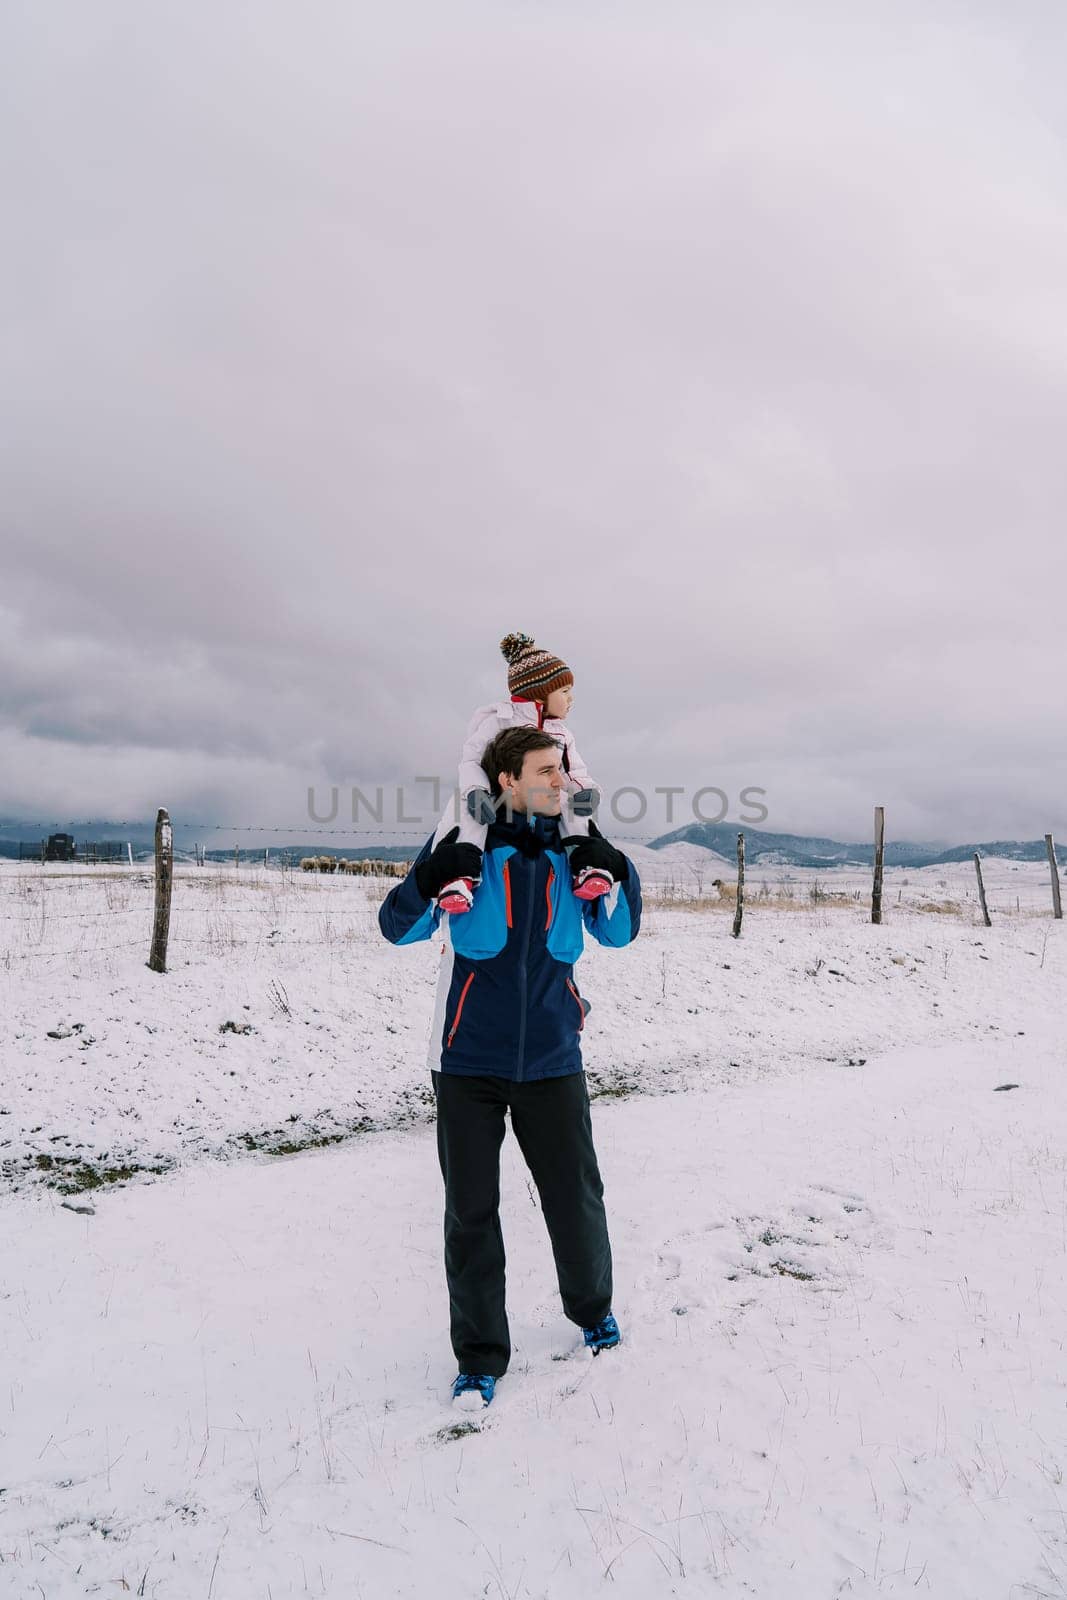 Dad with a little girl on his shoulders walks along a fenced snowy pasture looking to the side by Nadtochiy